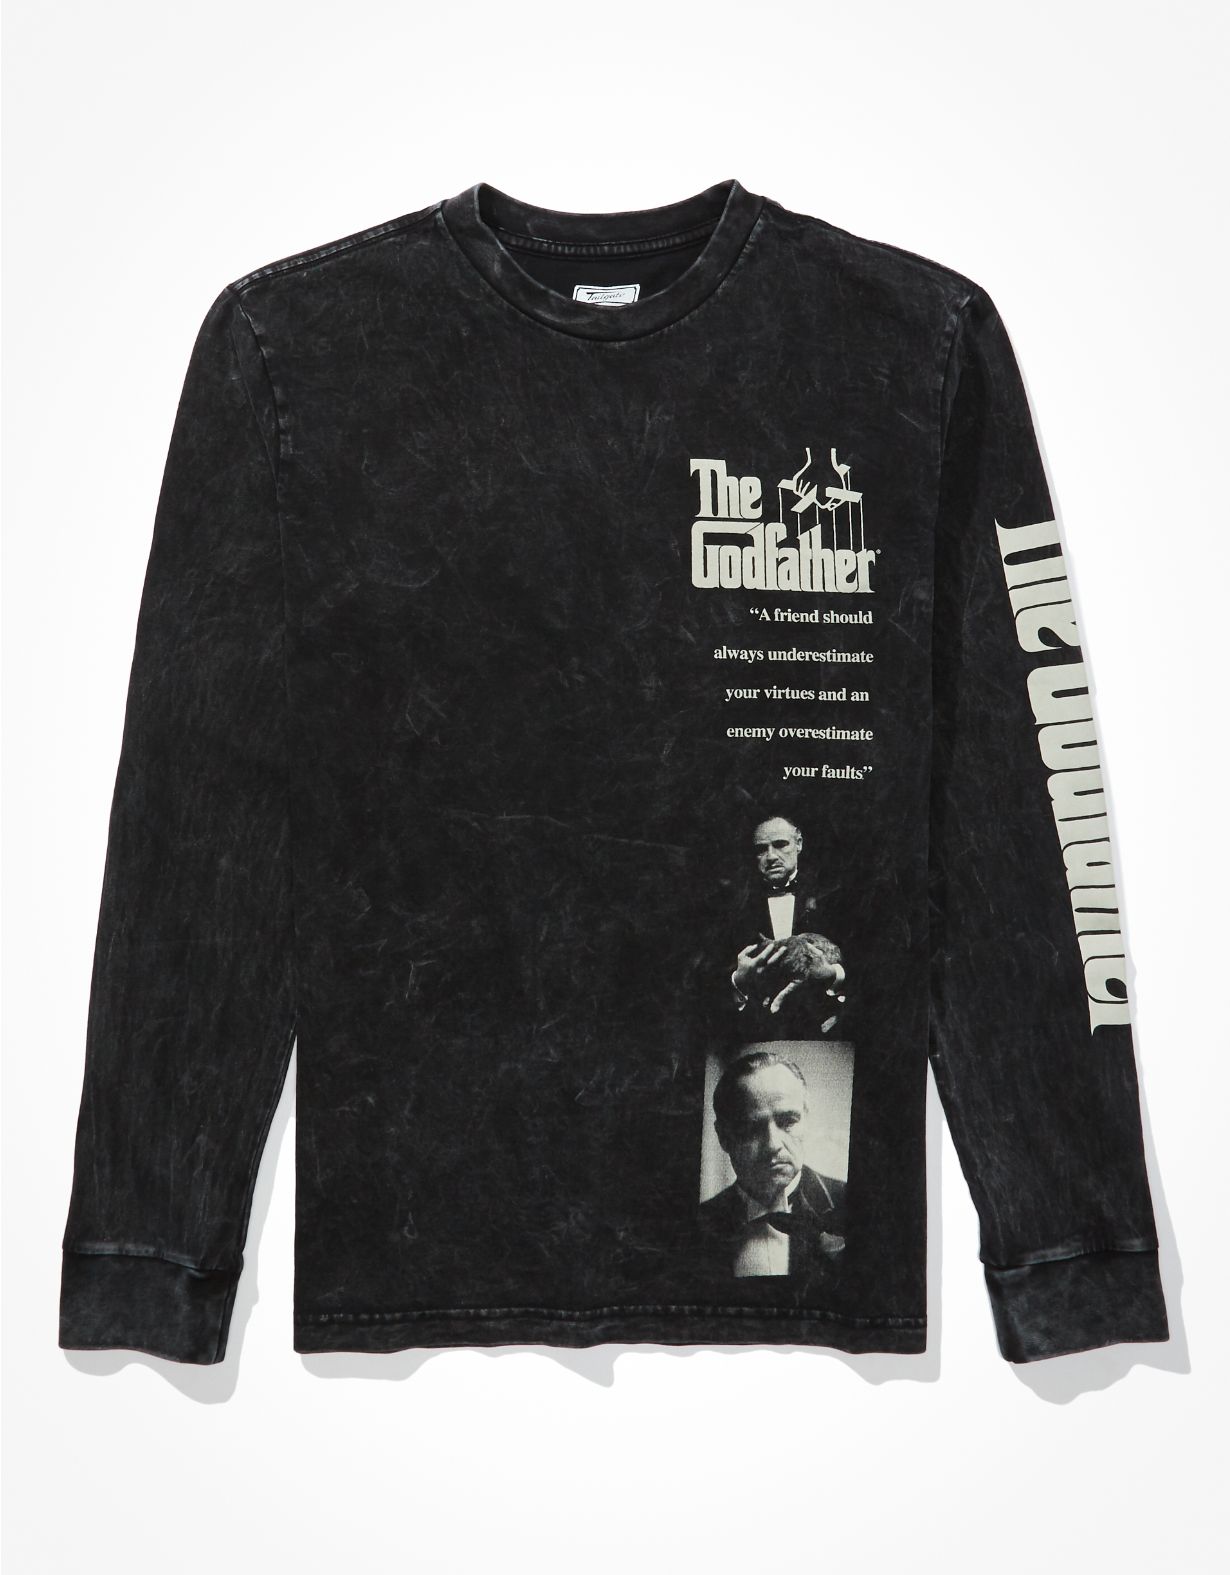 Tailgate Men's The Godfather Long-Sleeve Graphic T-Shirt